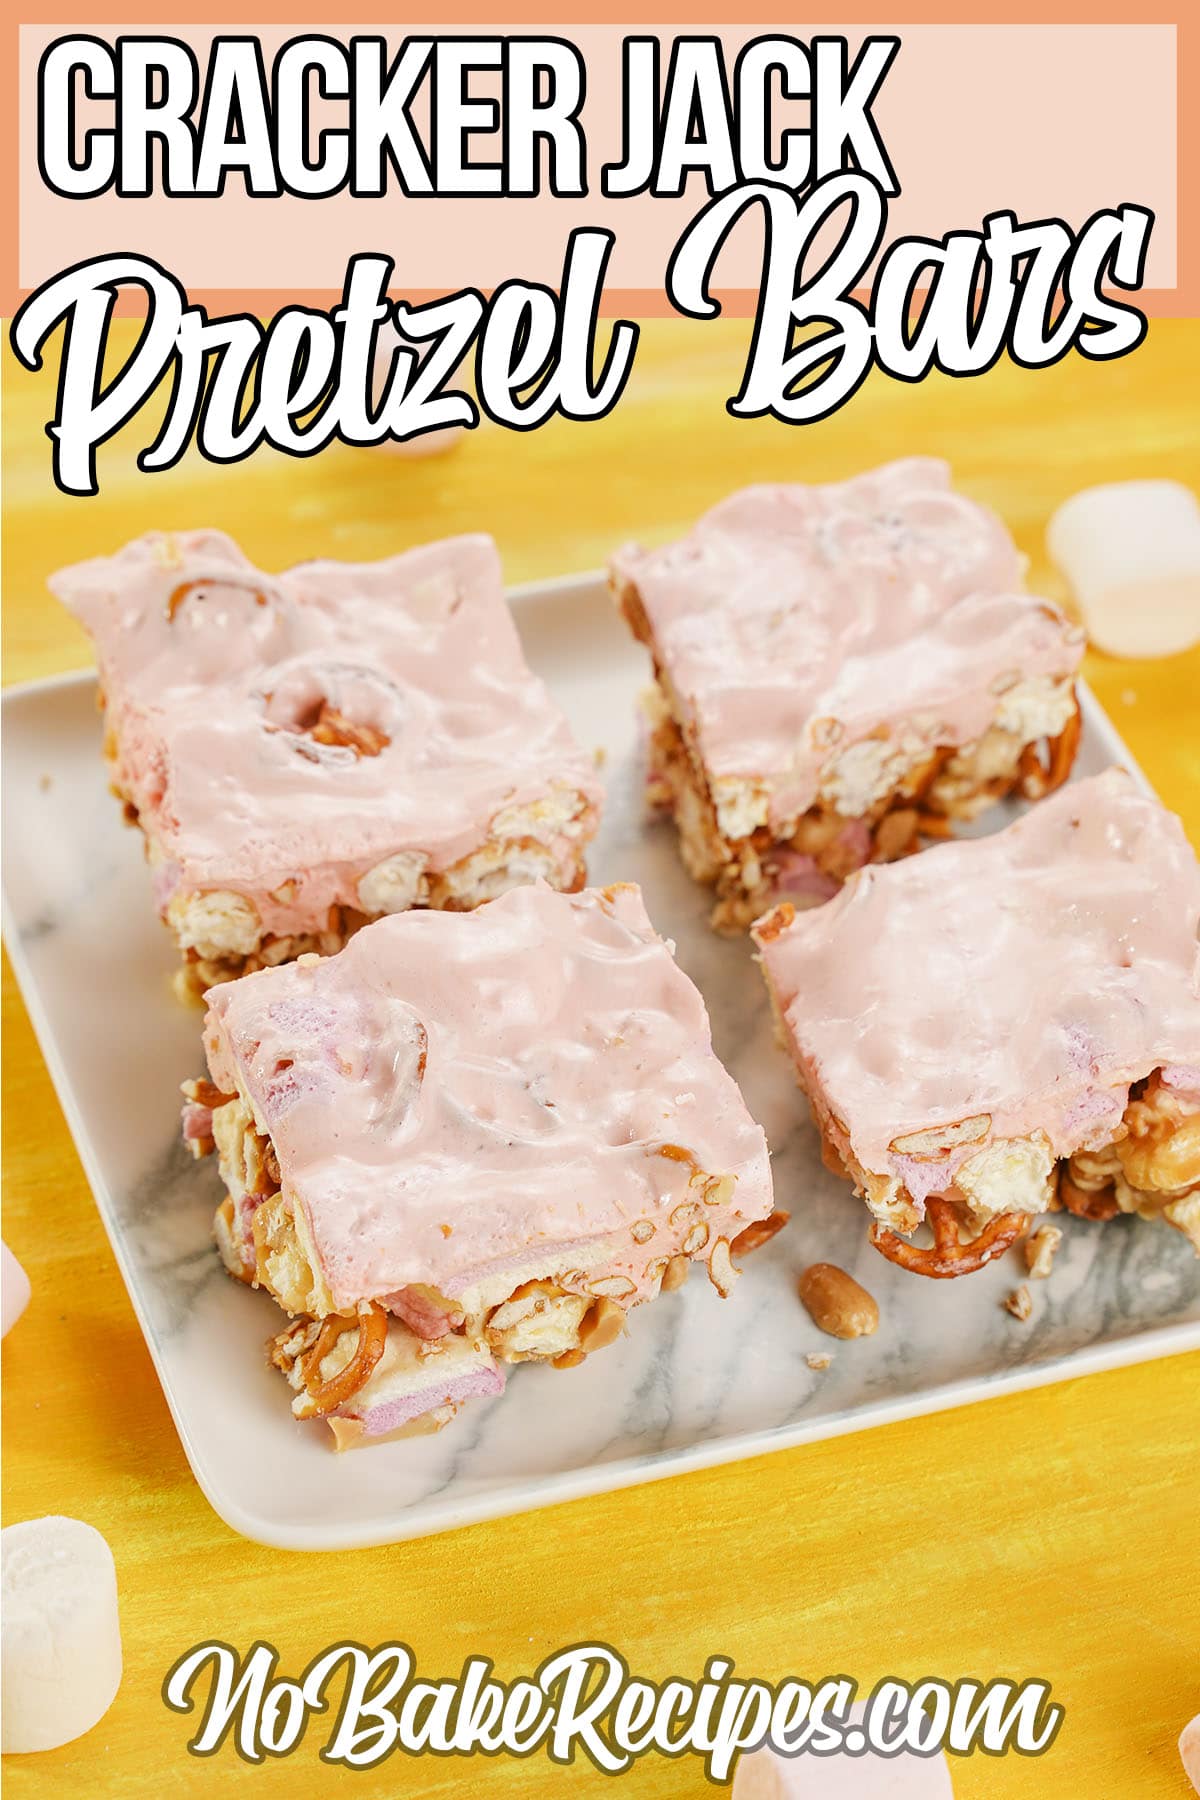 peanut and popcorn candy bar recipe with text which reads cracker jack pretzel bars